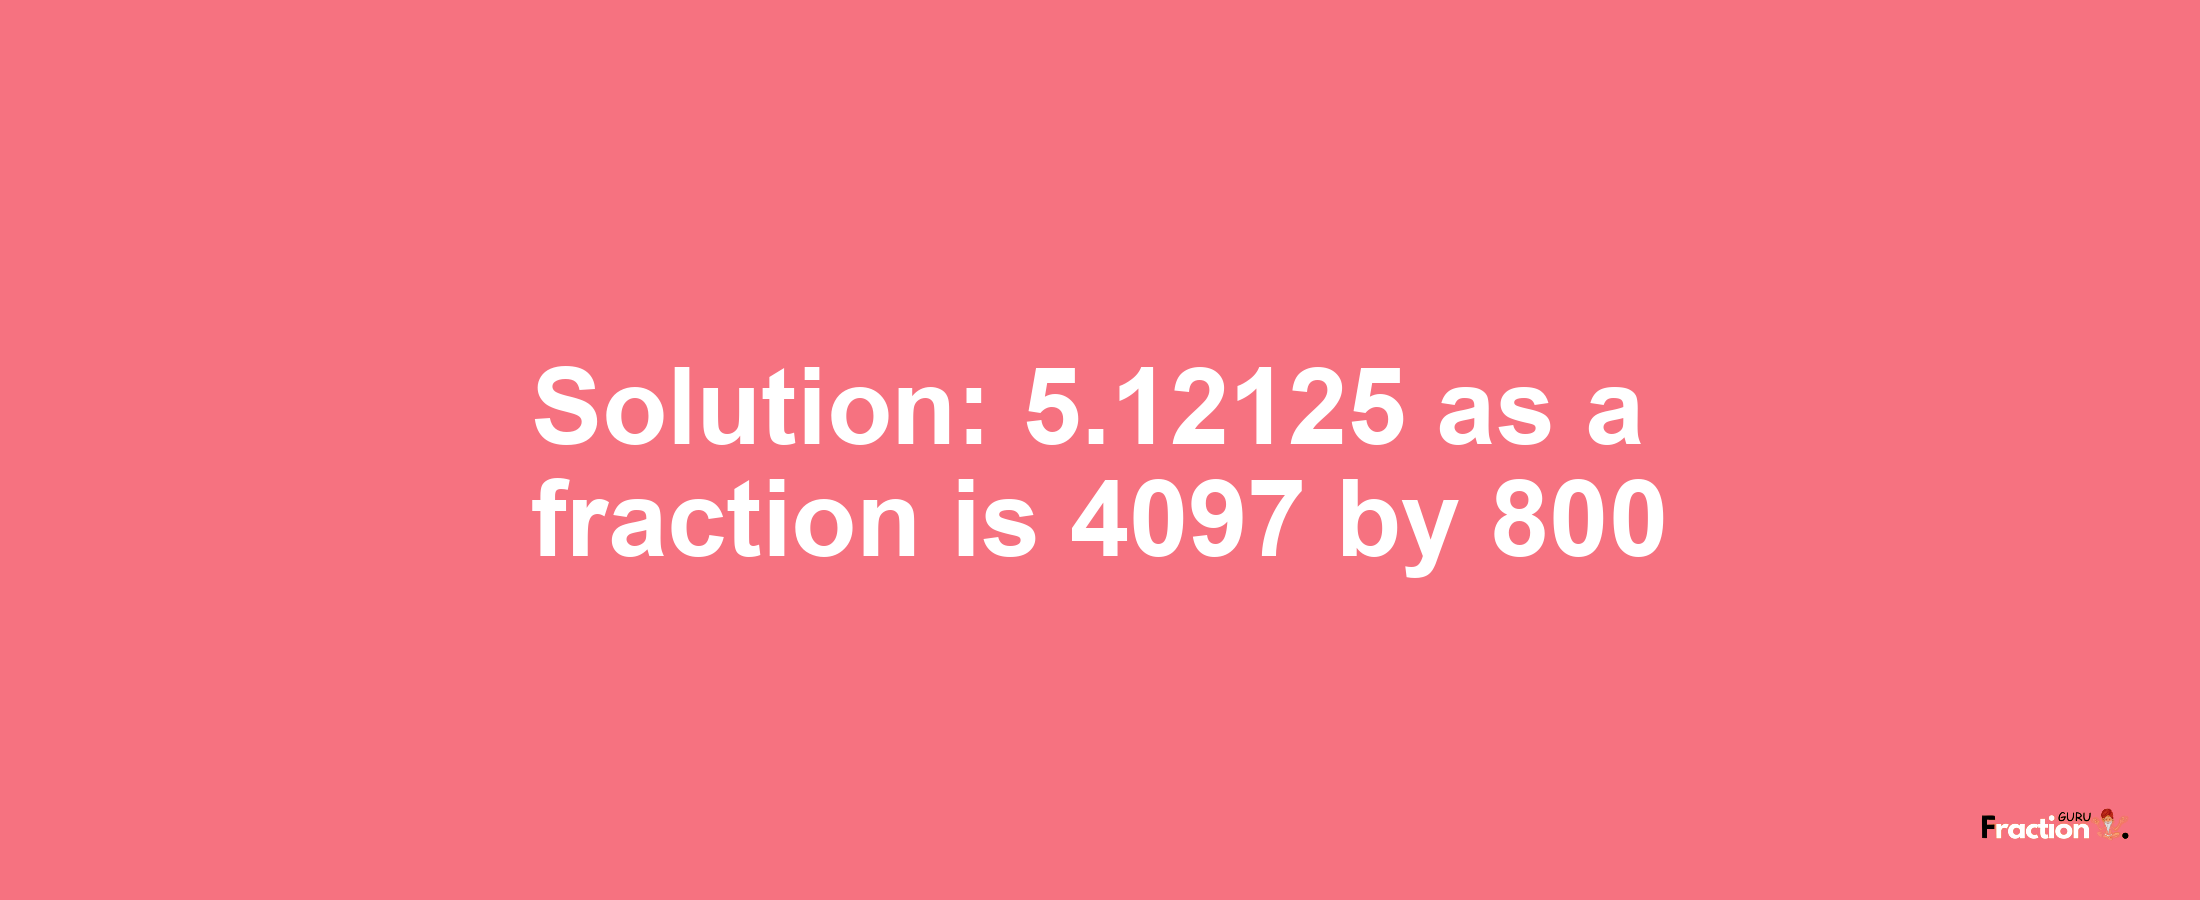 Solution:5.12125 as a fraction is 4097/800